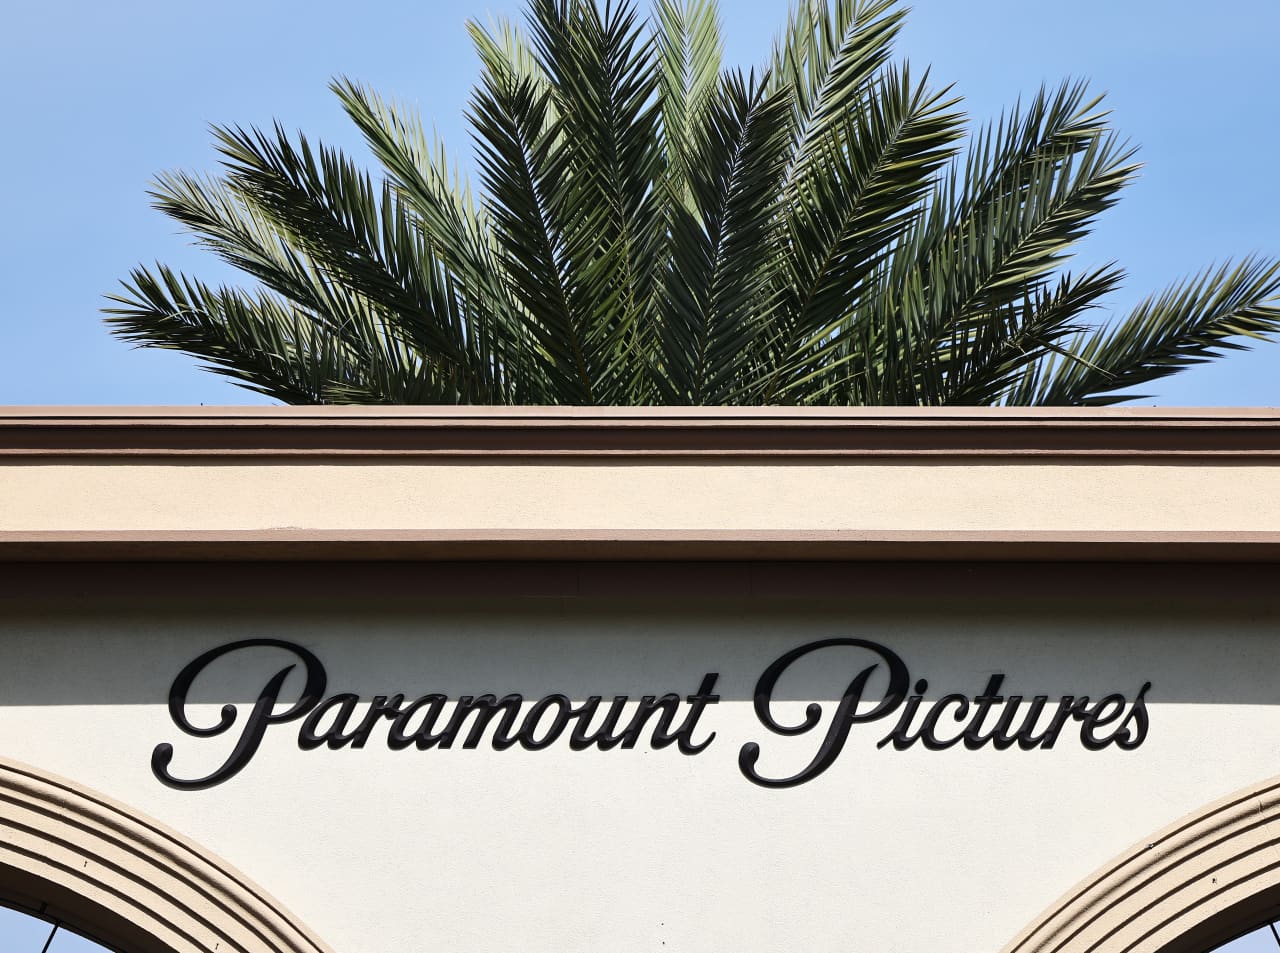 Paramount’s new ‘Office of the CEO’ now has a leader — while its ex-CEO will still collect a hefty paycheck